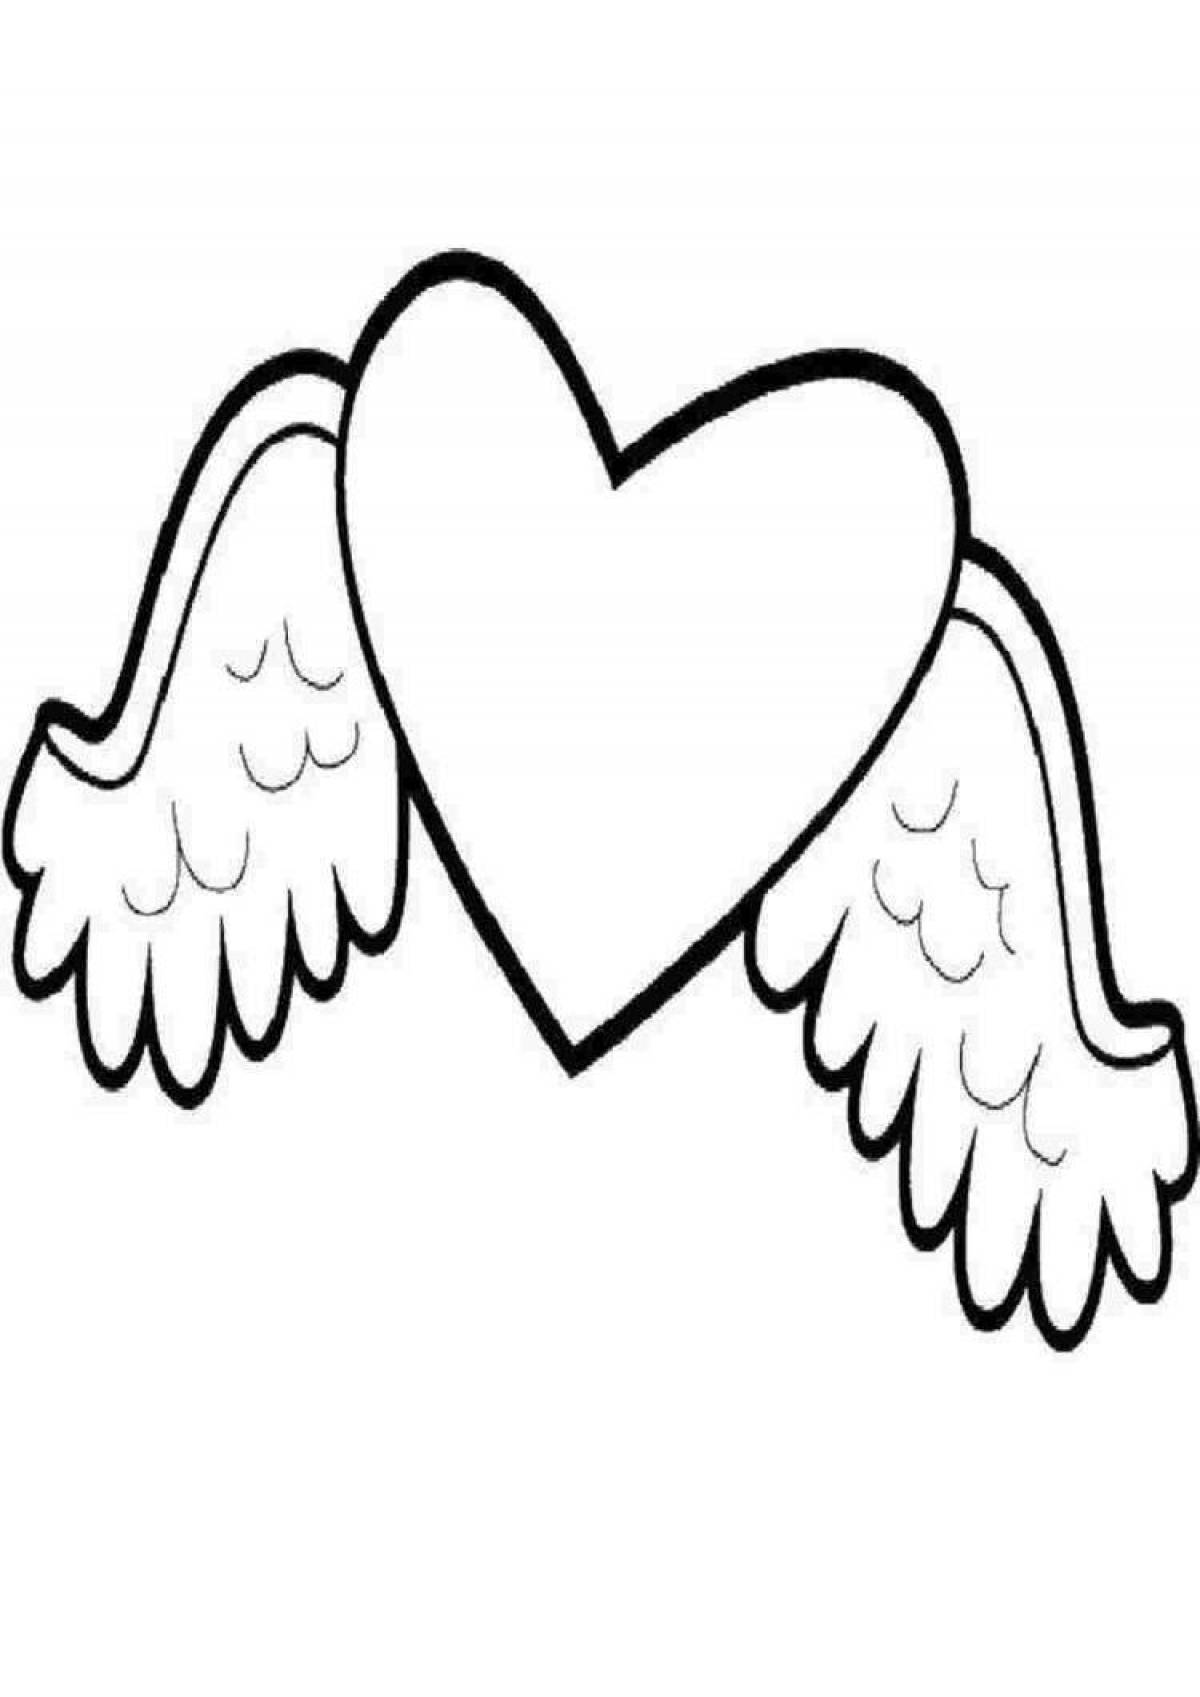 Heart with wings #5